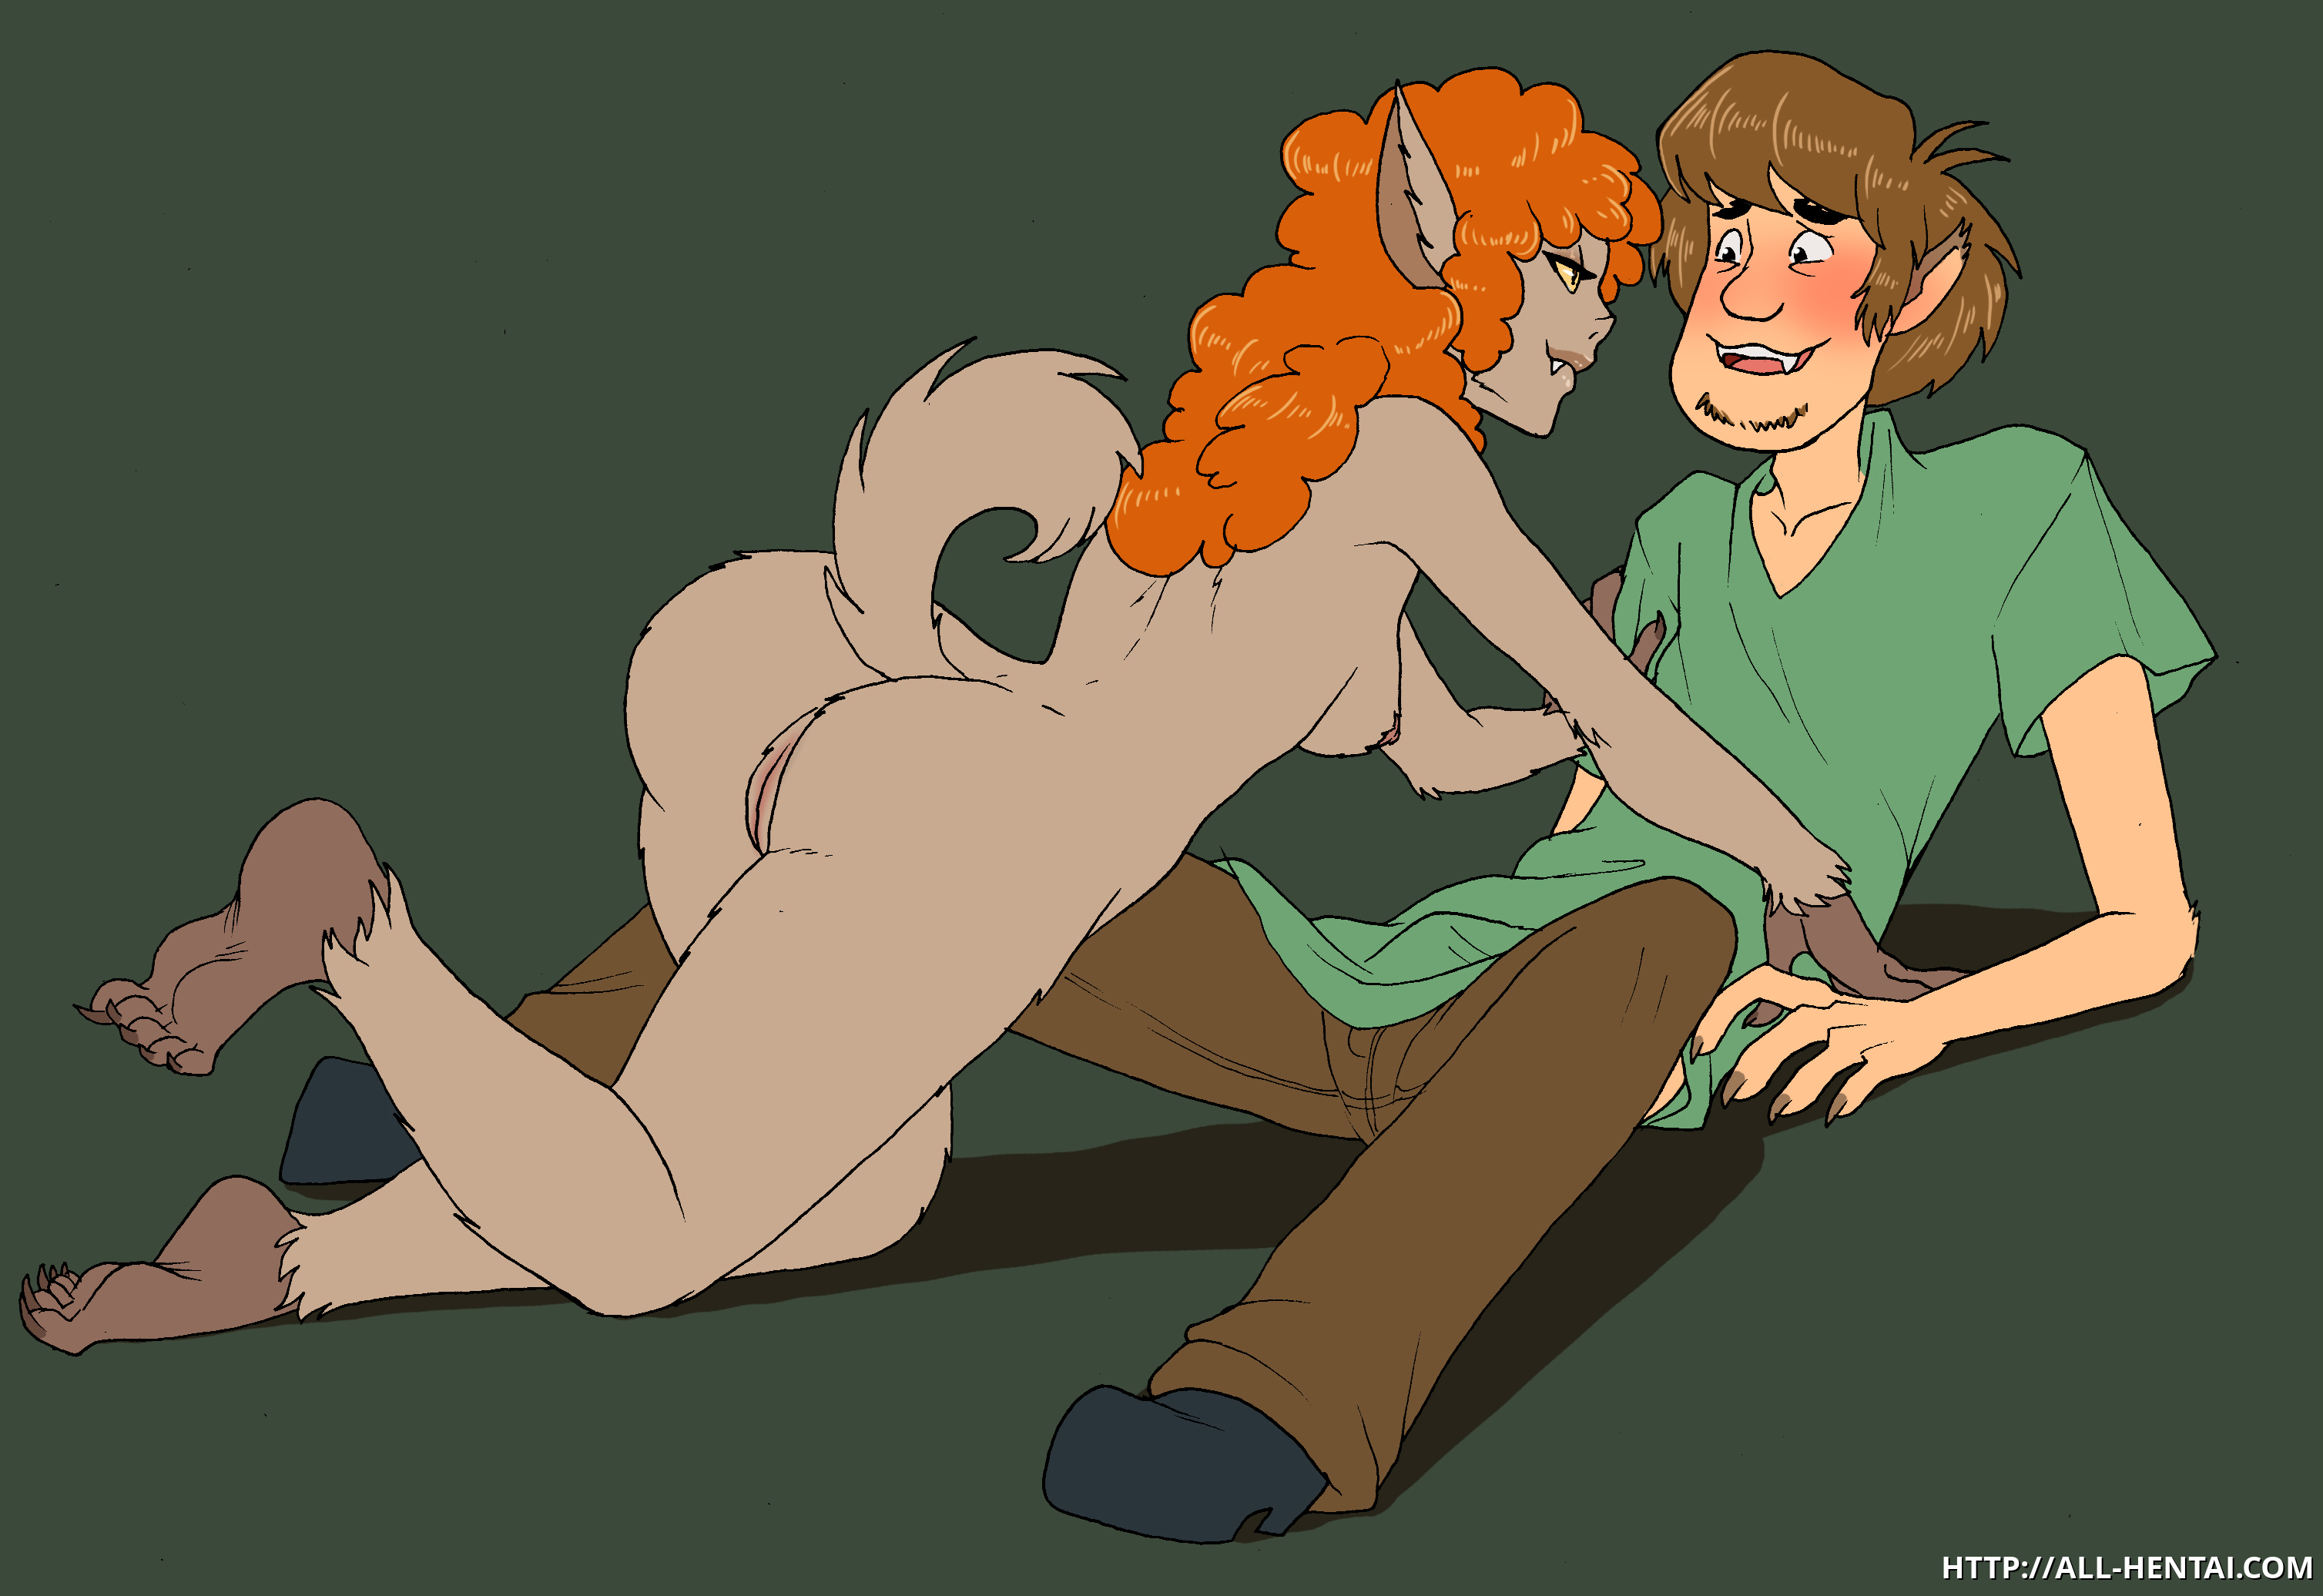 Sexy Scooby Doo Shaggy Porn - Shaggy is about to know the true meaning of doggy style fuckingâ€¦ â€“ Scooby  Doo Hentai